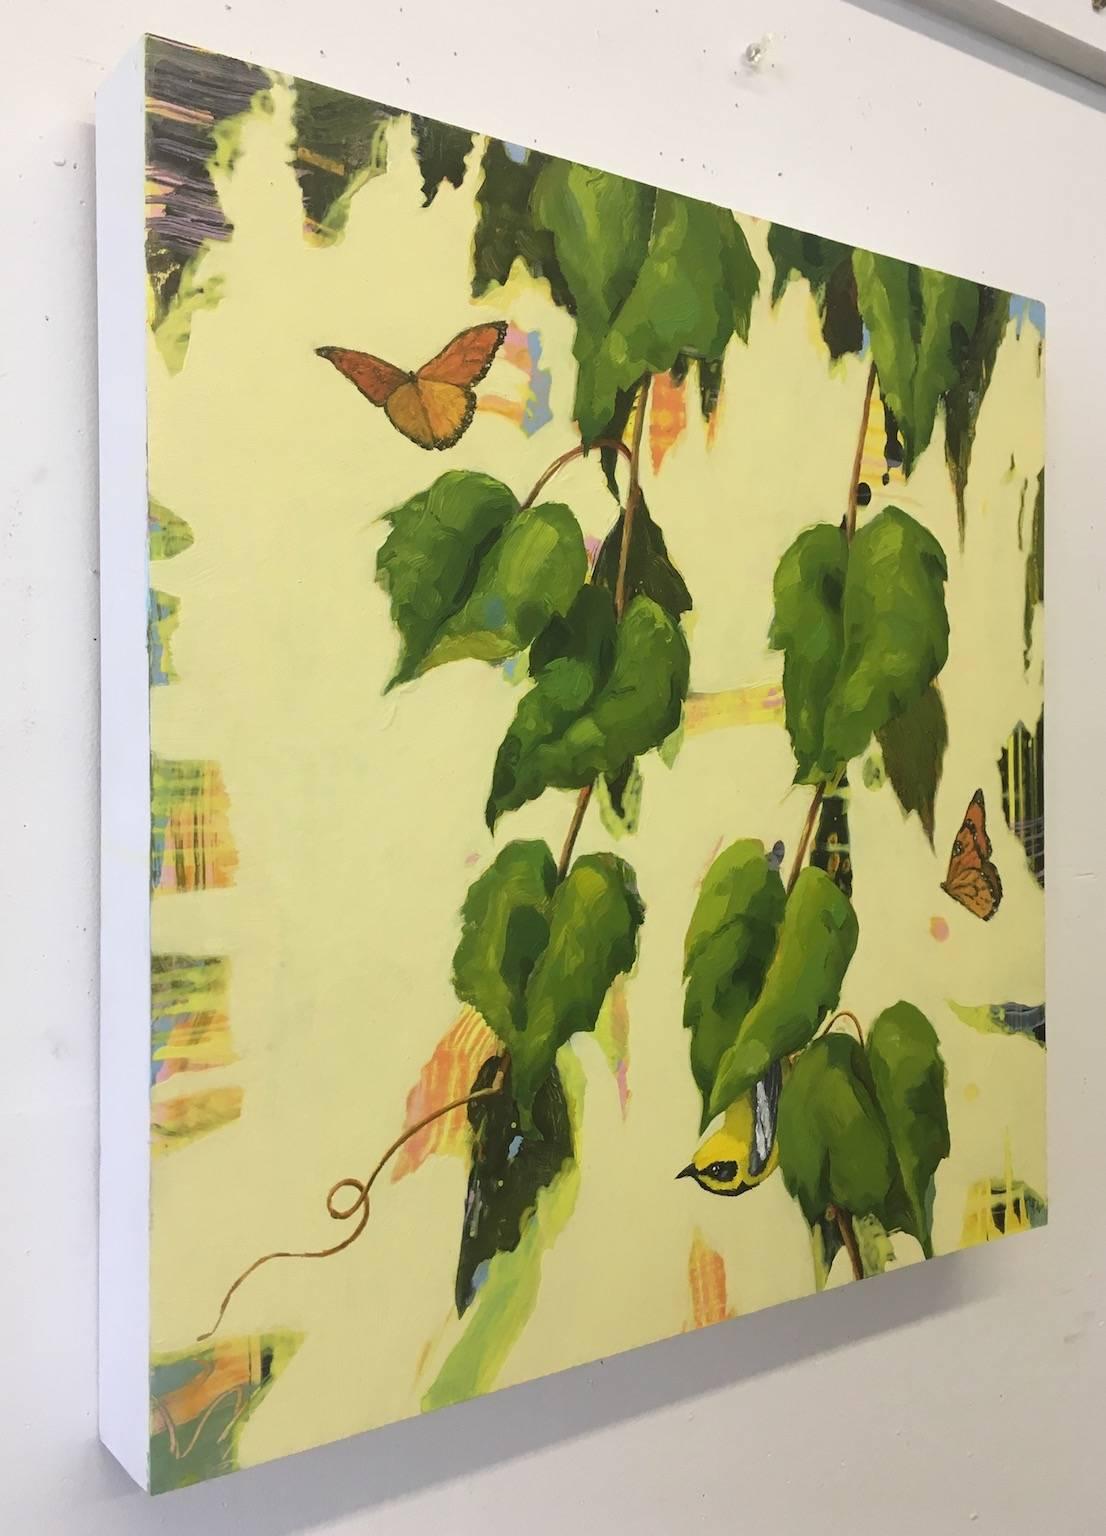 Anne Sargent Walker’s Monarchs and Warbler is one of a series of oil and acrylic paintings celebrating the beauty, complexity and fragility of the natural world. It is a lovely pale yellow and lush green painting featuring butterflies, vines, and a